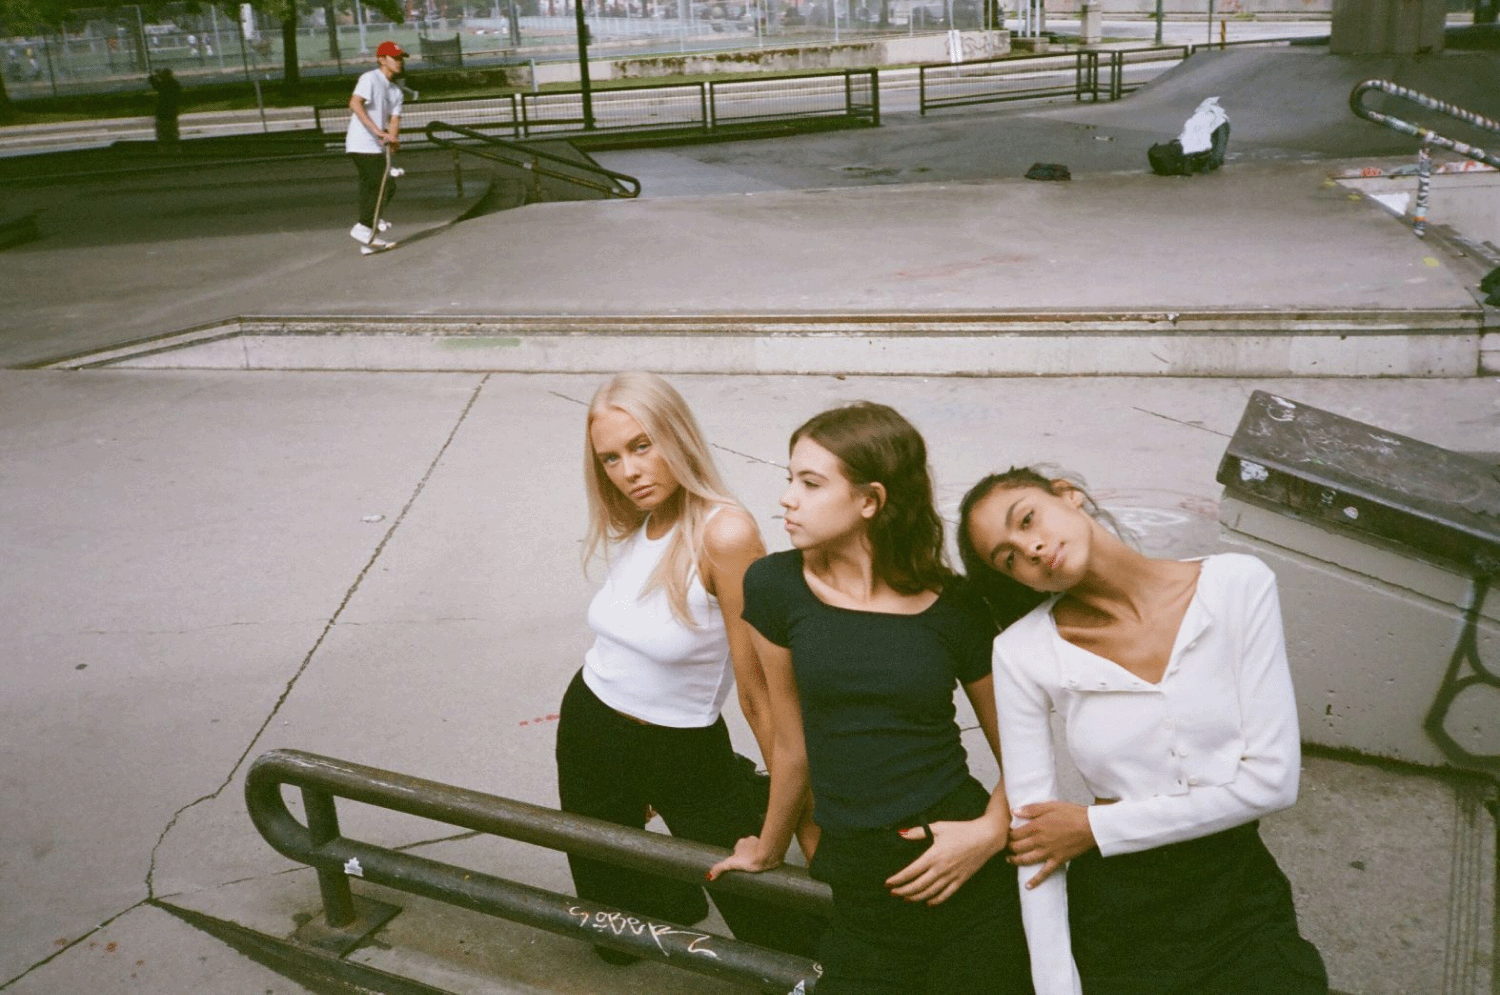 Three girls hanging out in a skate park with skateboaders in the background. Shot on 35mm film. 